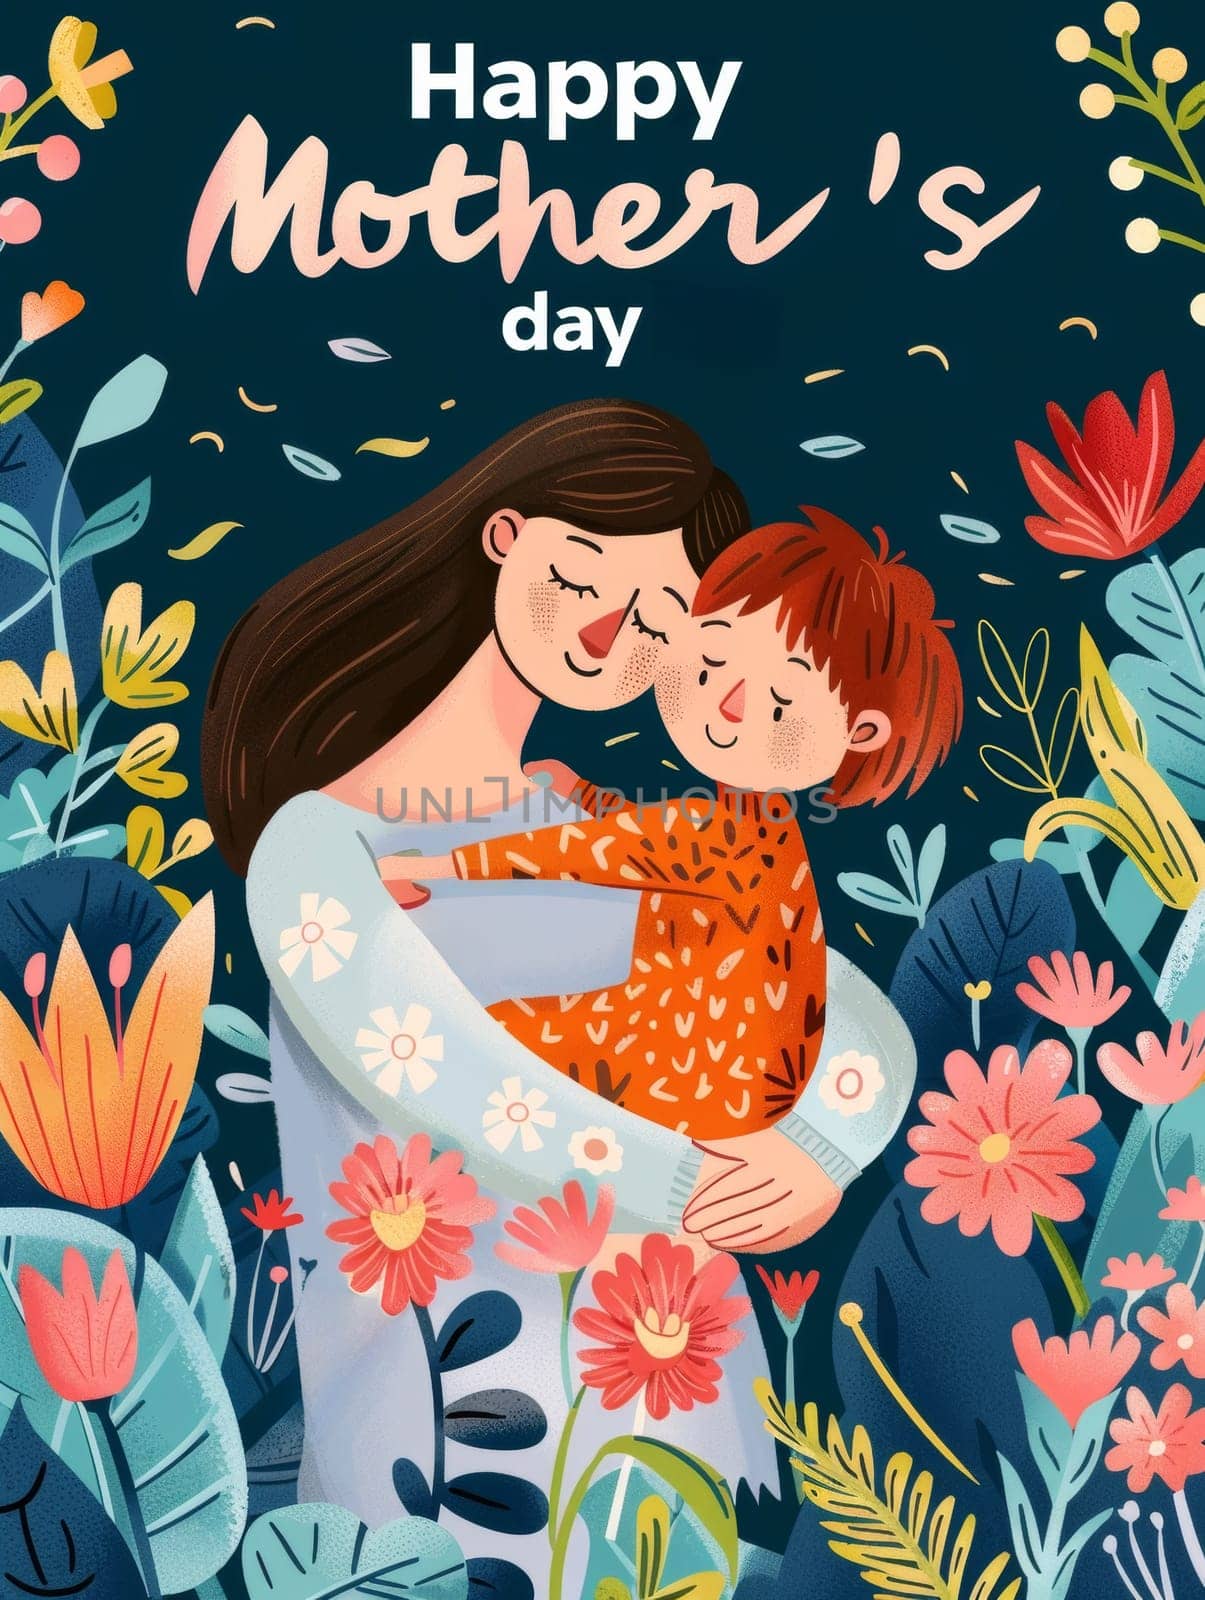 An affectionate illustration of a mother hugging her son amid a garden of red flowers, expressing the warmth of Mothers Day. by sfinks